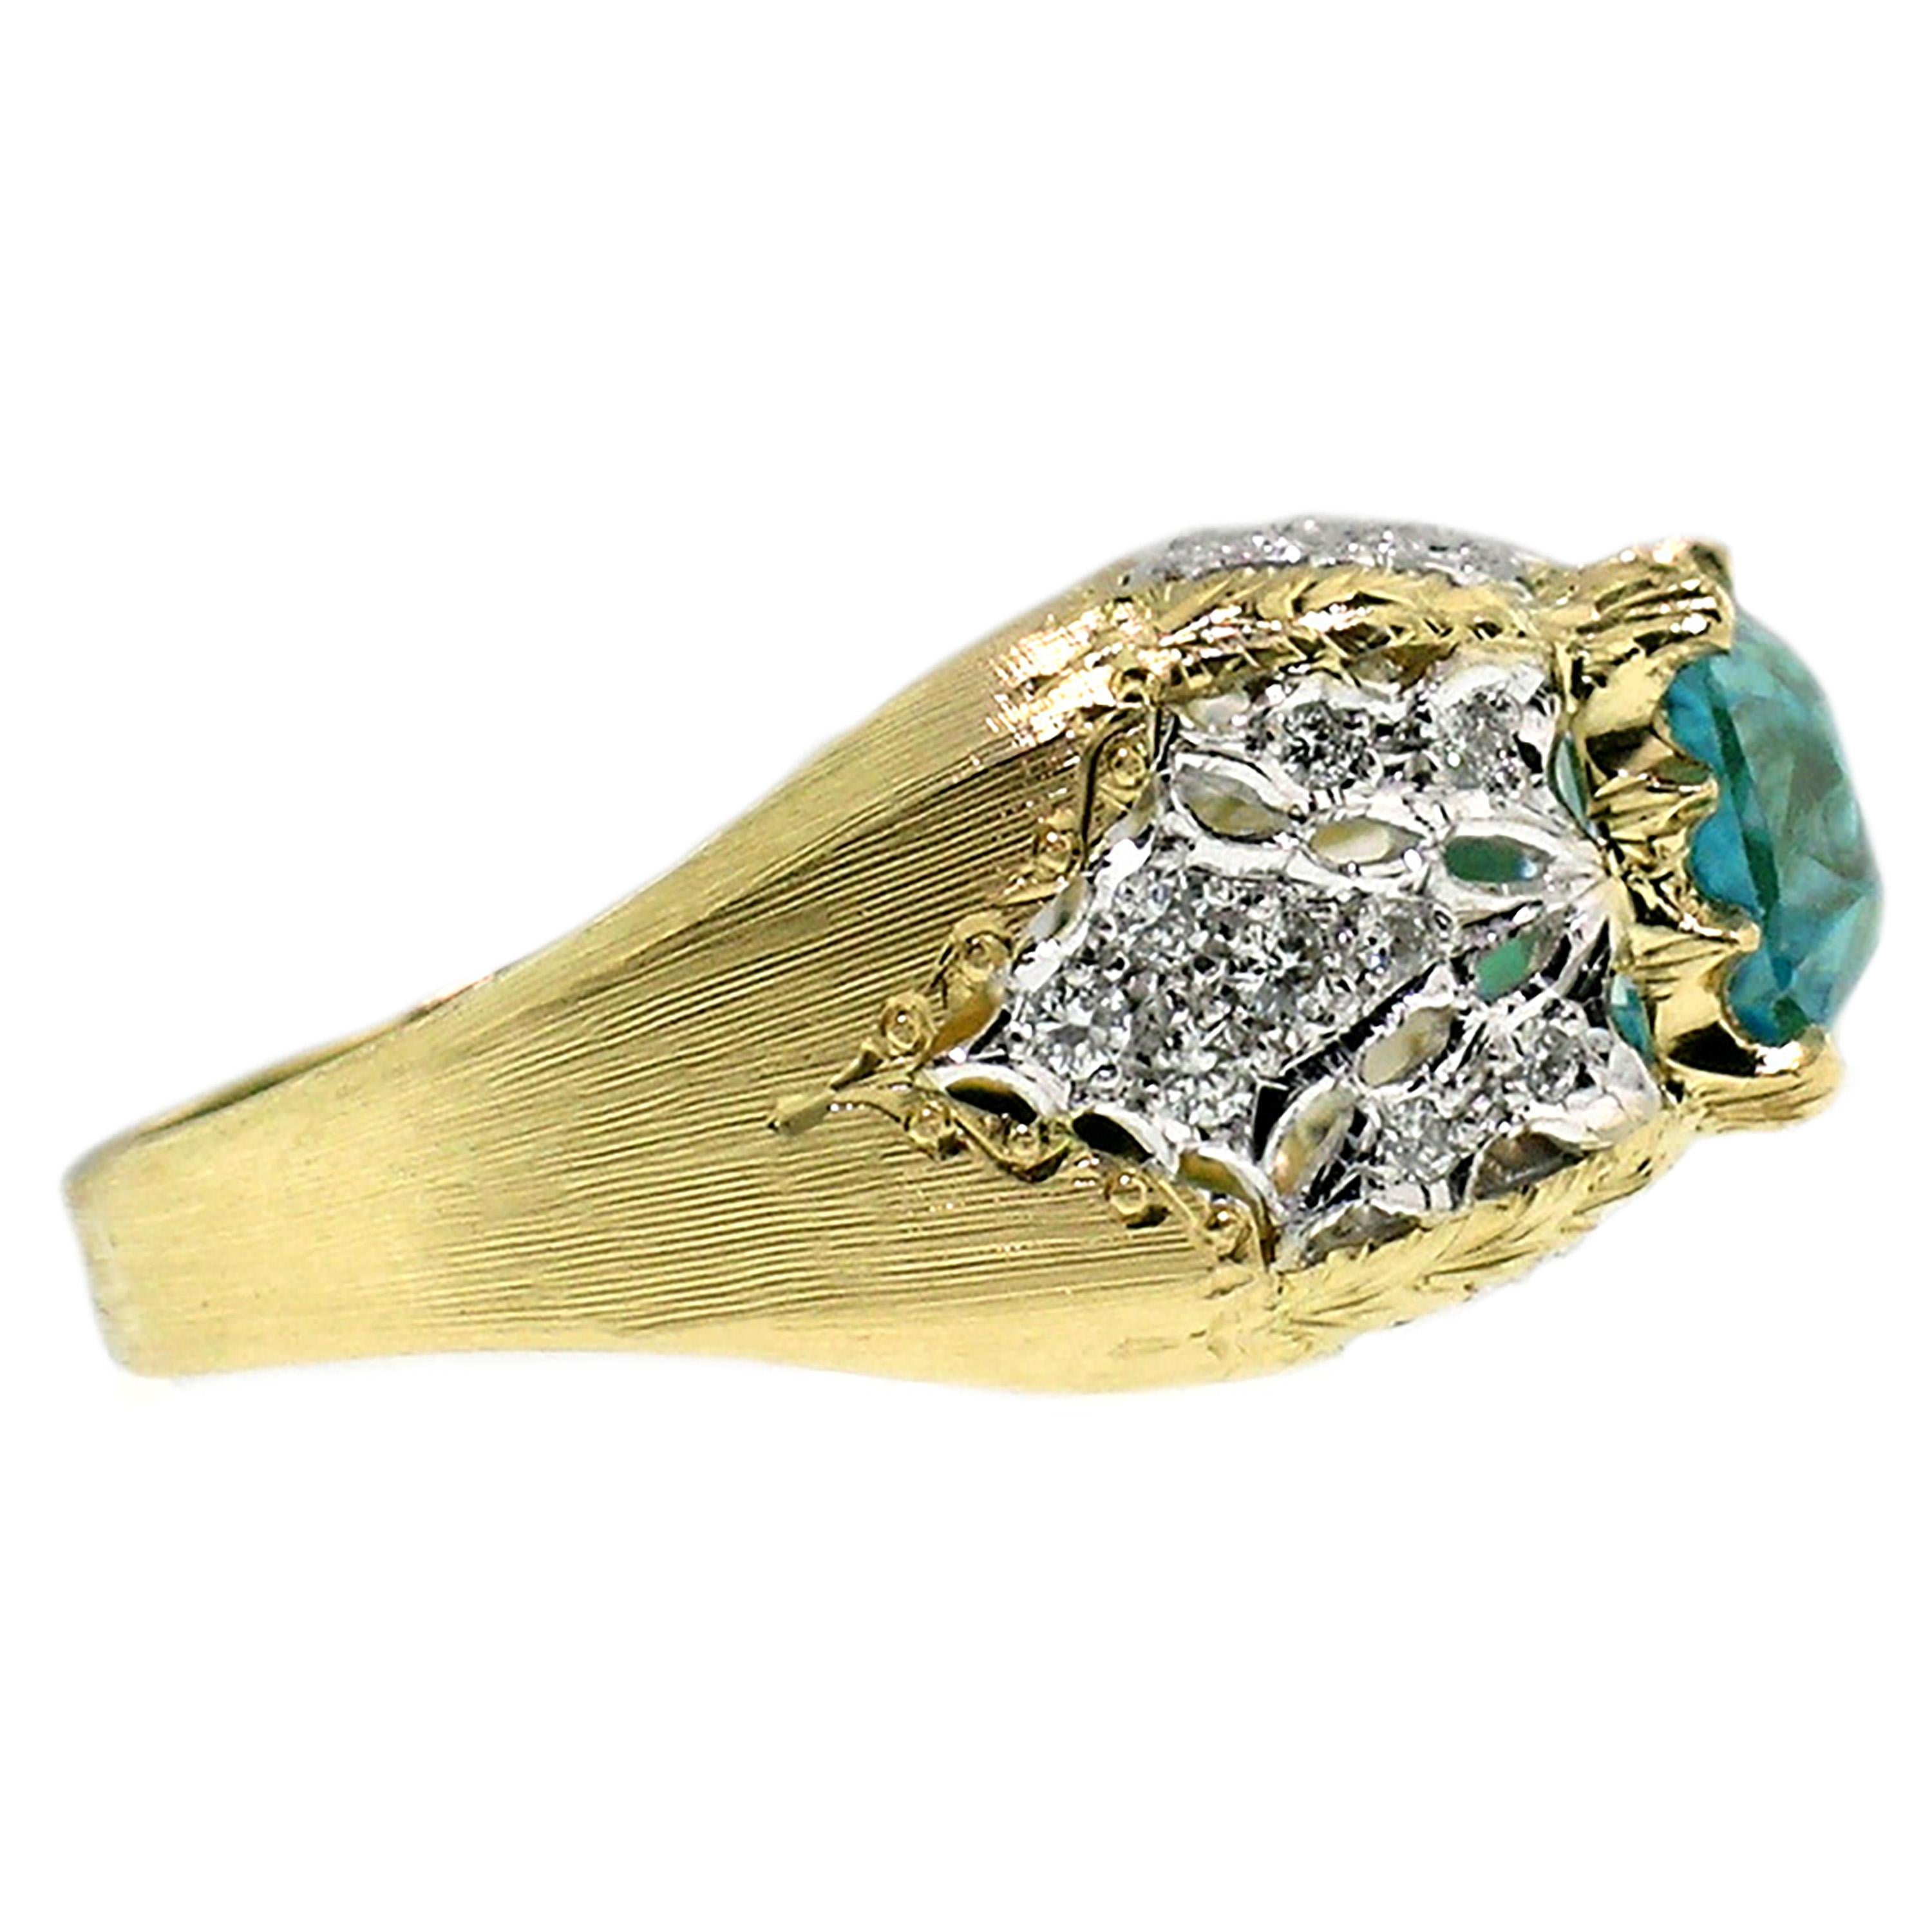 Radiant Cut Cynthia Scott 8.69ct Cambodian Blue Zircon in 18kt Diamond Ring, Made in Italy For Sale